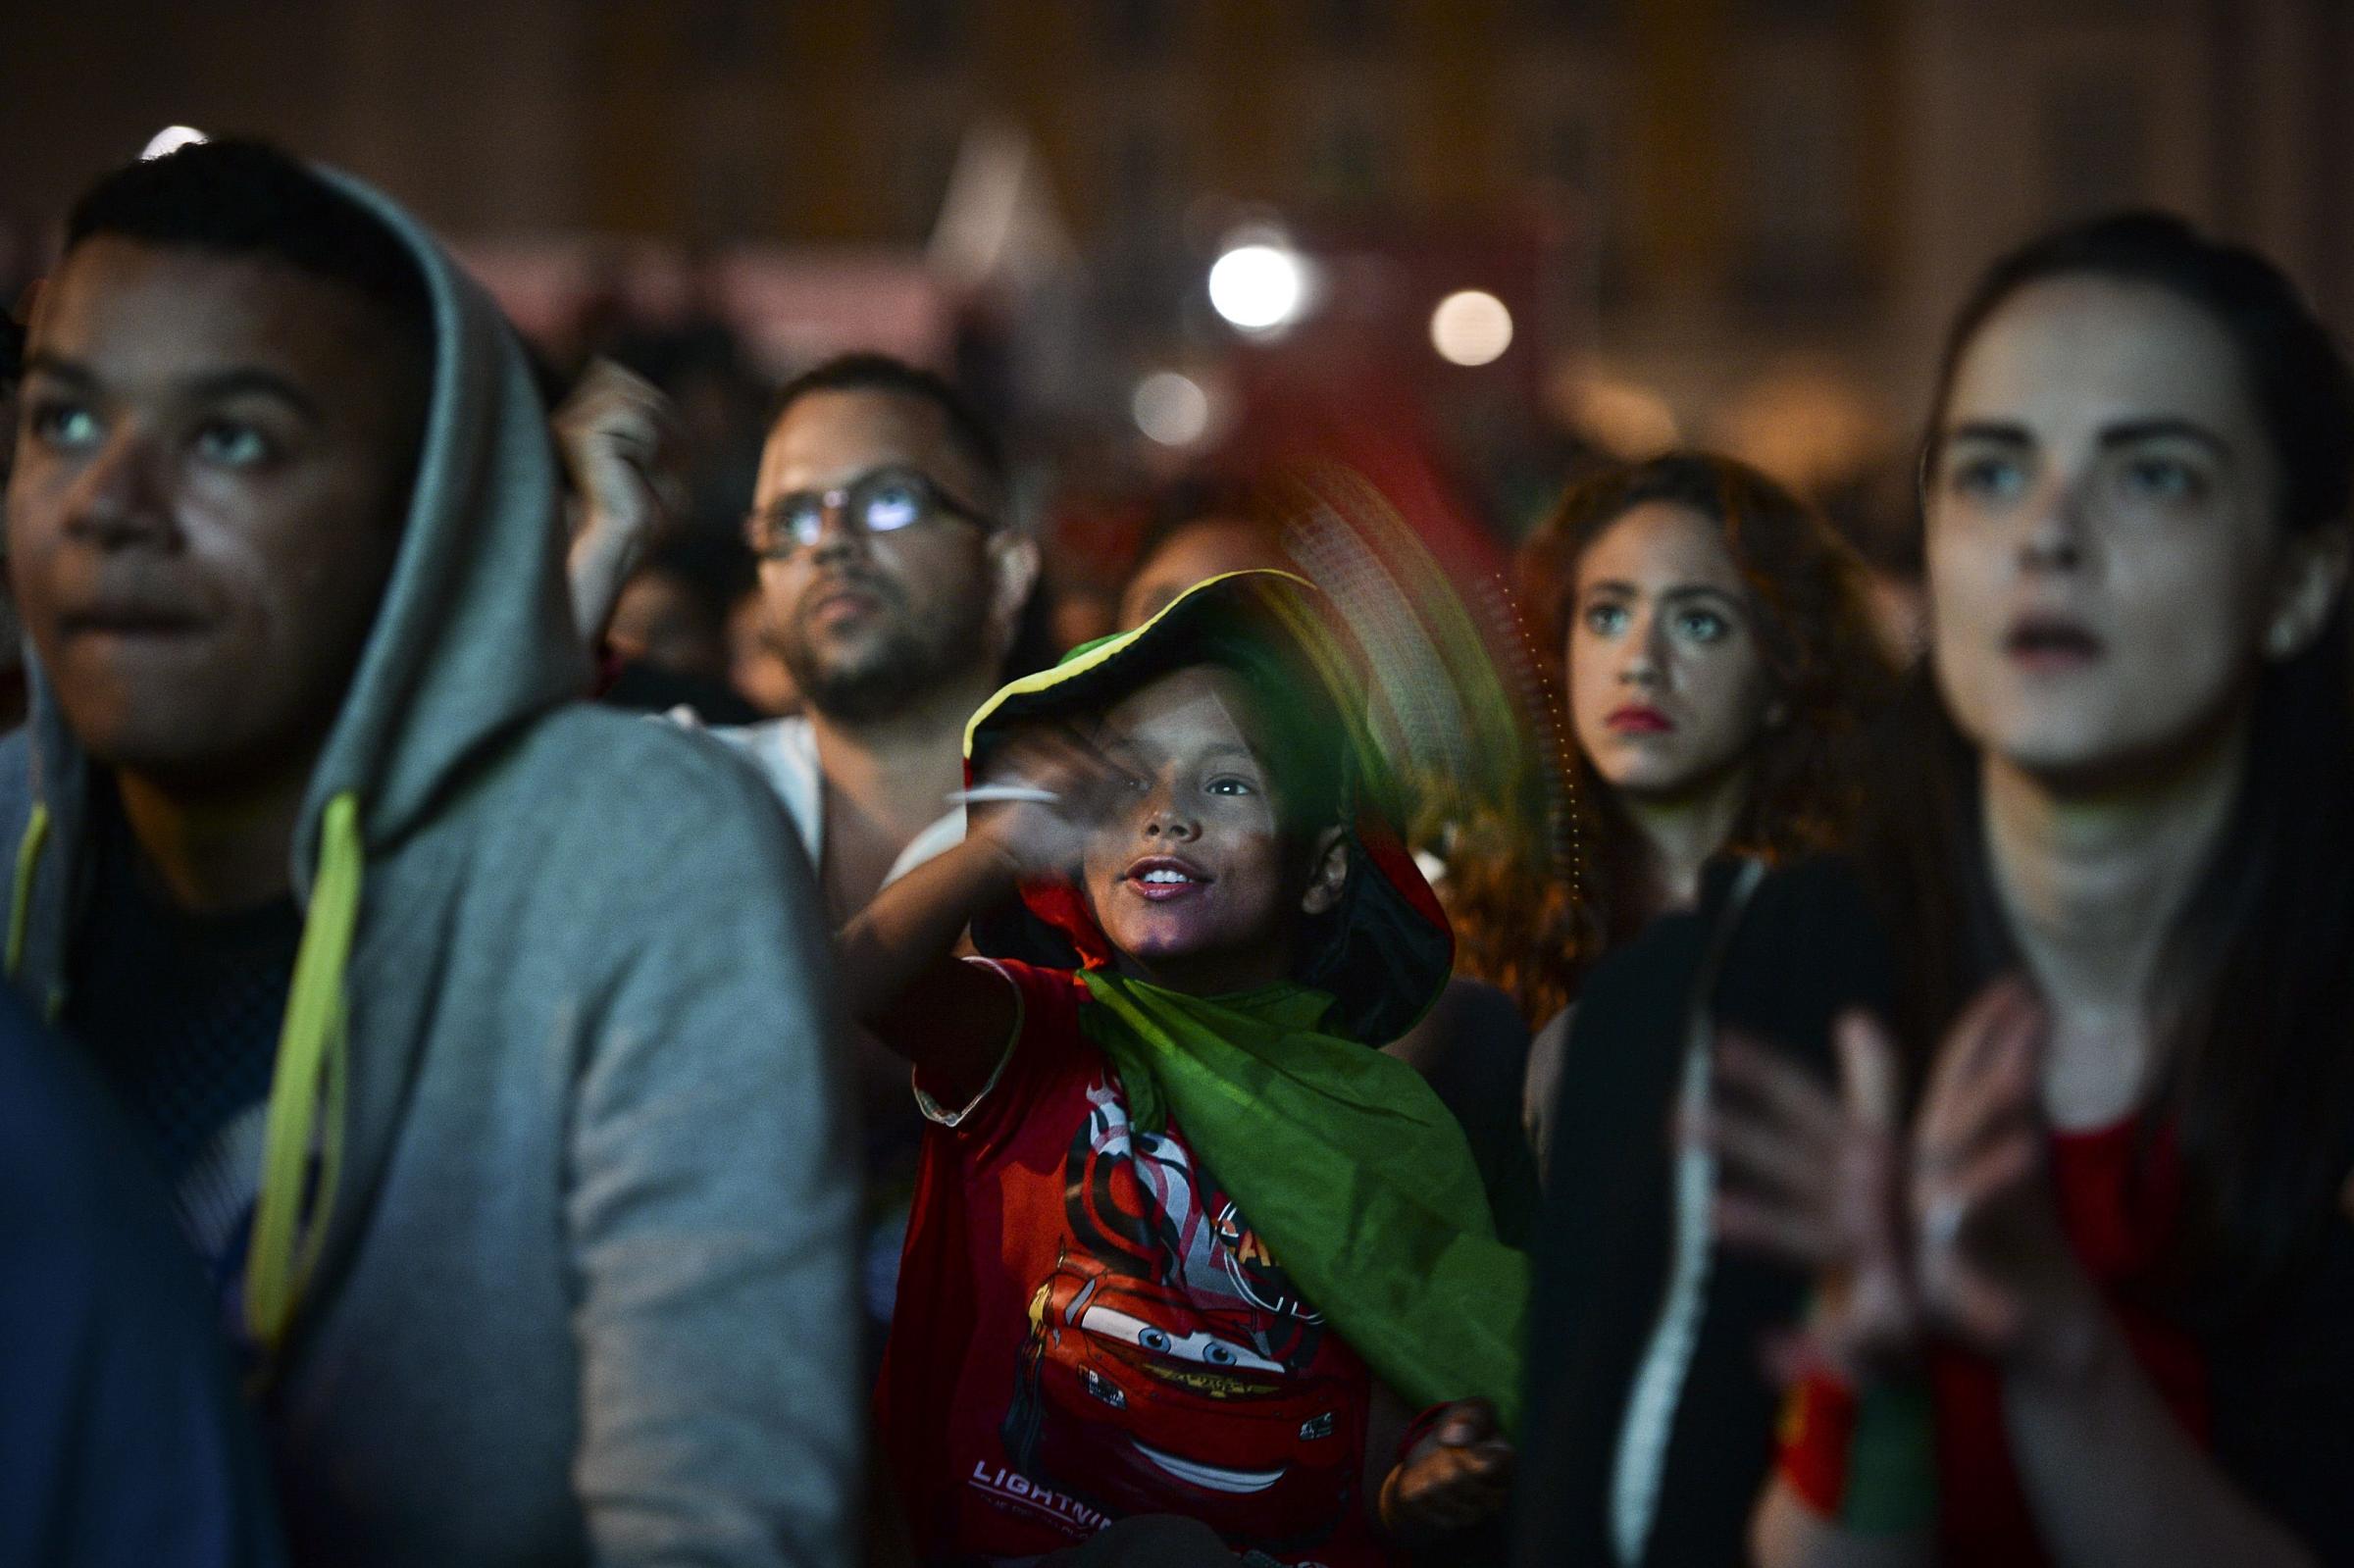 Supporters of the Portuguese national team gather at Terreiro do Paco Square in Lisbon on June 22, 2014 during a public viewing of the FIFA World Cup 2014 group G match between Portugal and the US played in Manaus, Brazil.